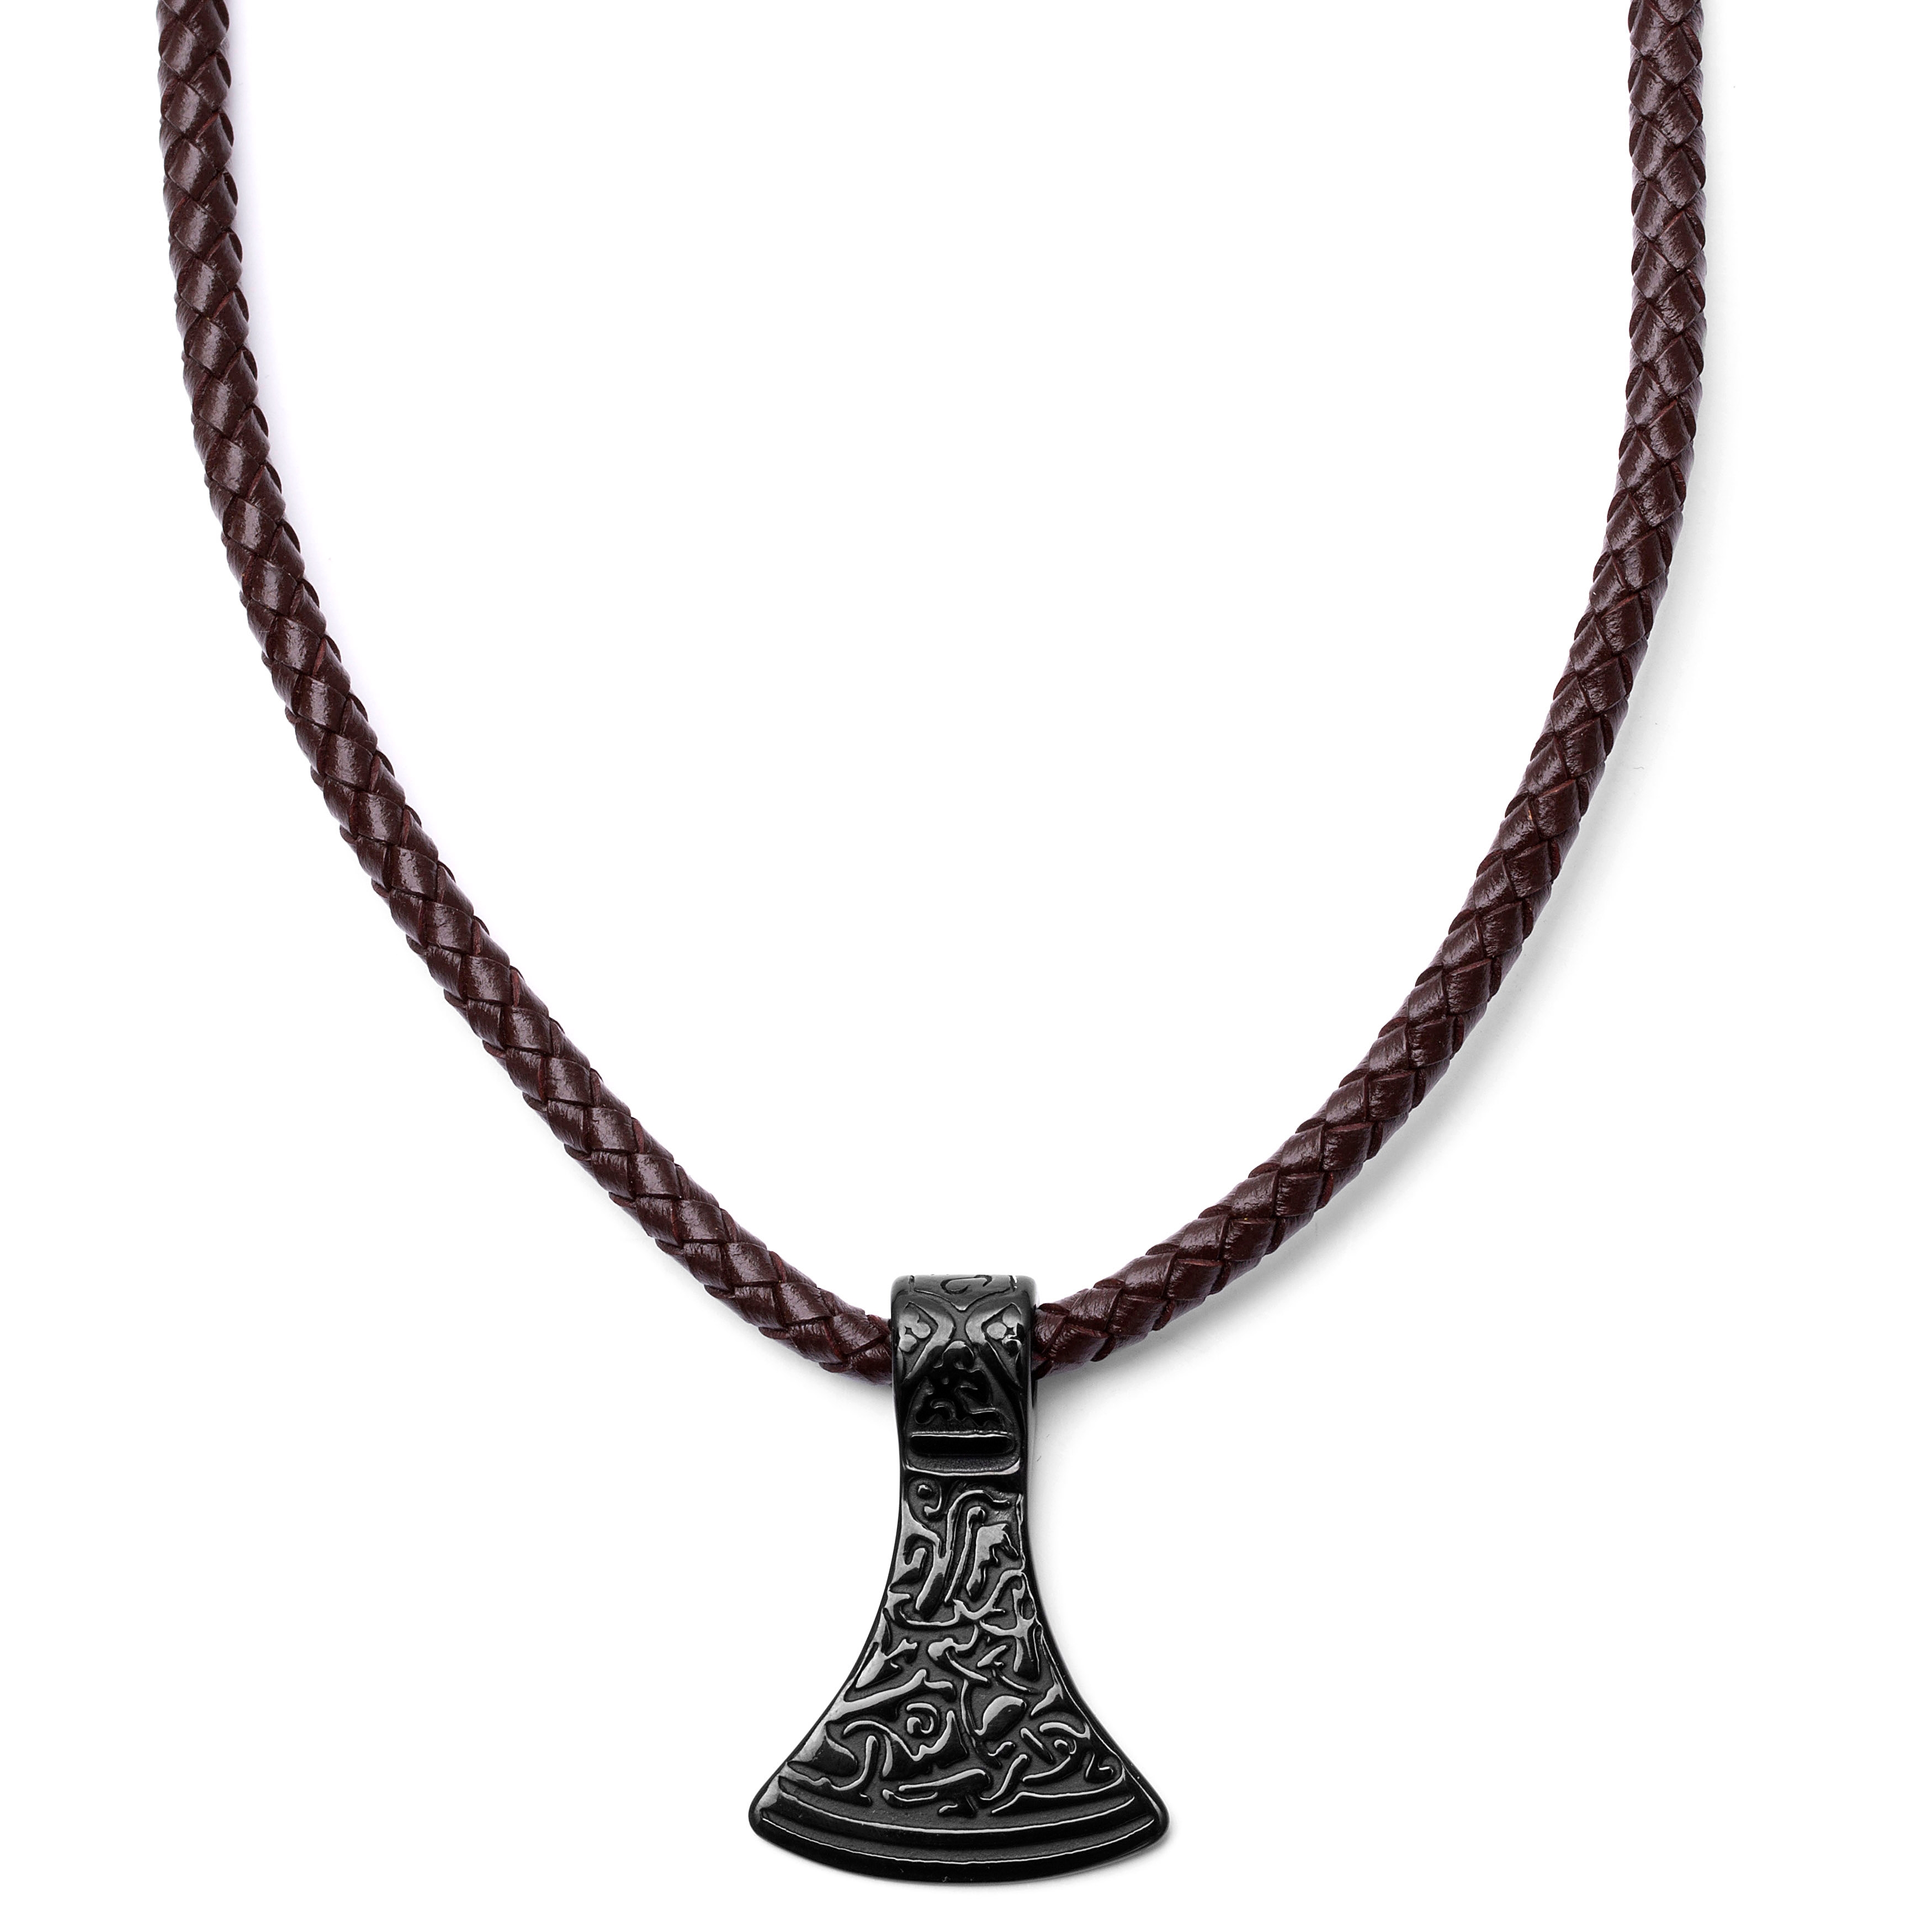 Thor's Hammer with Ram Head Pendent Necklace for Mens Costume 1.75L